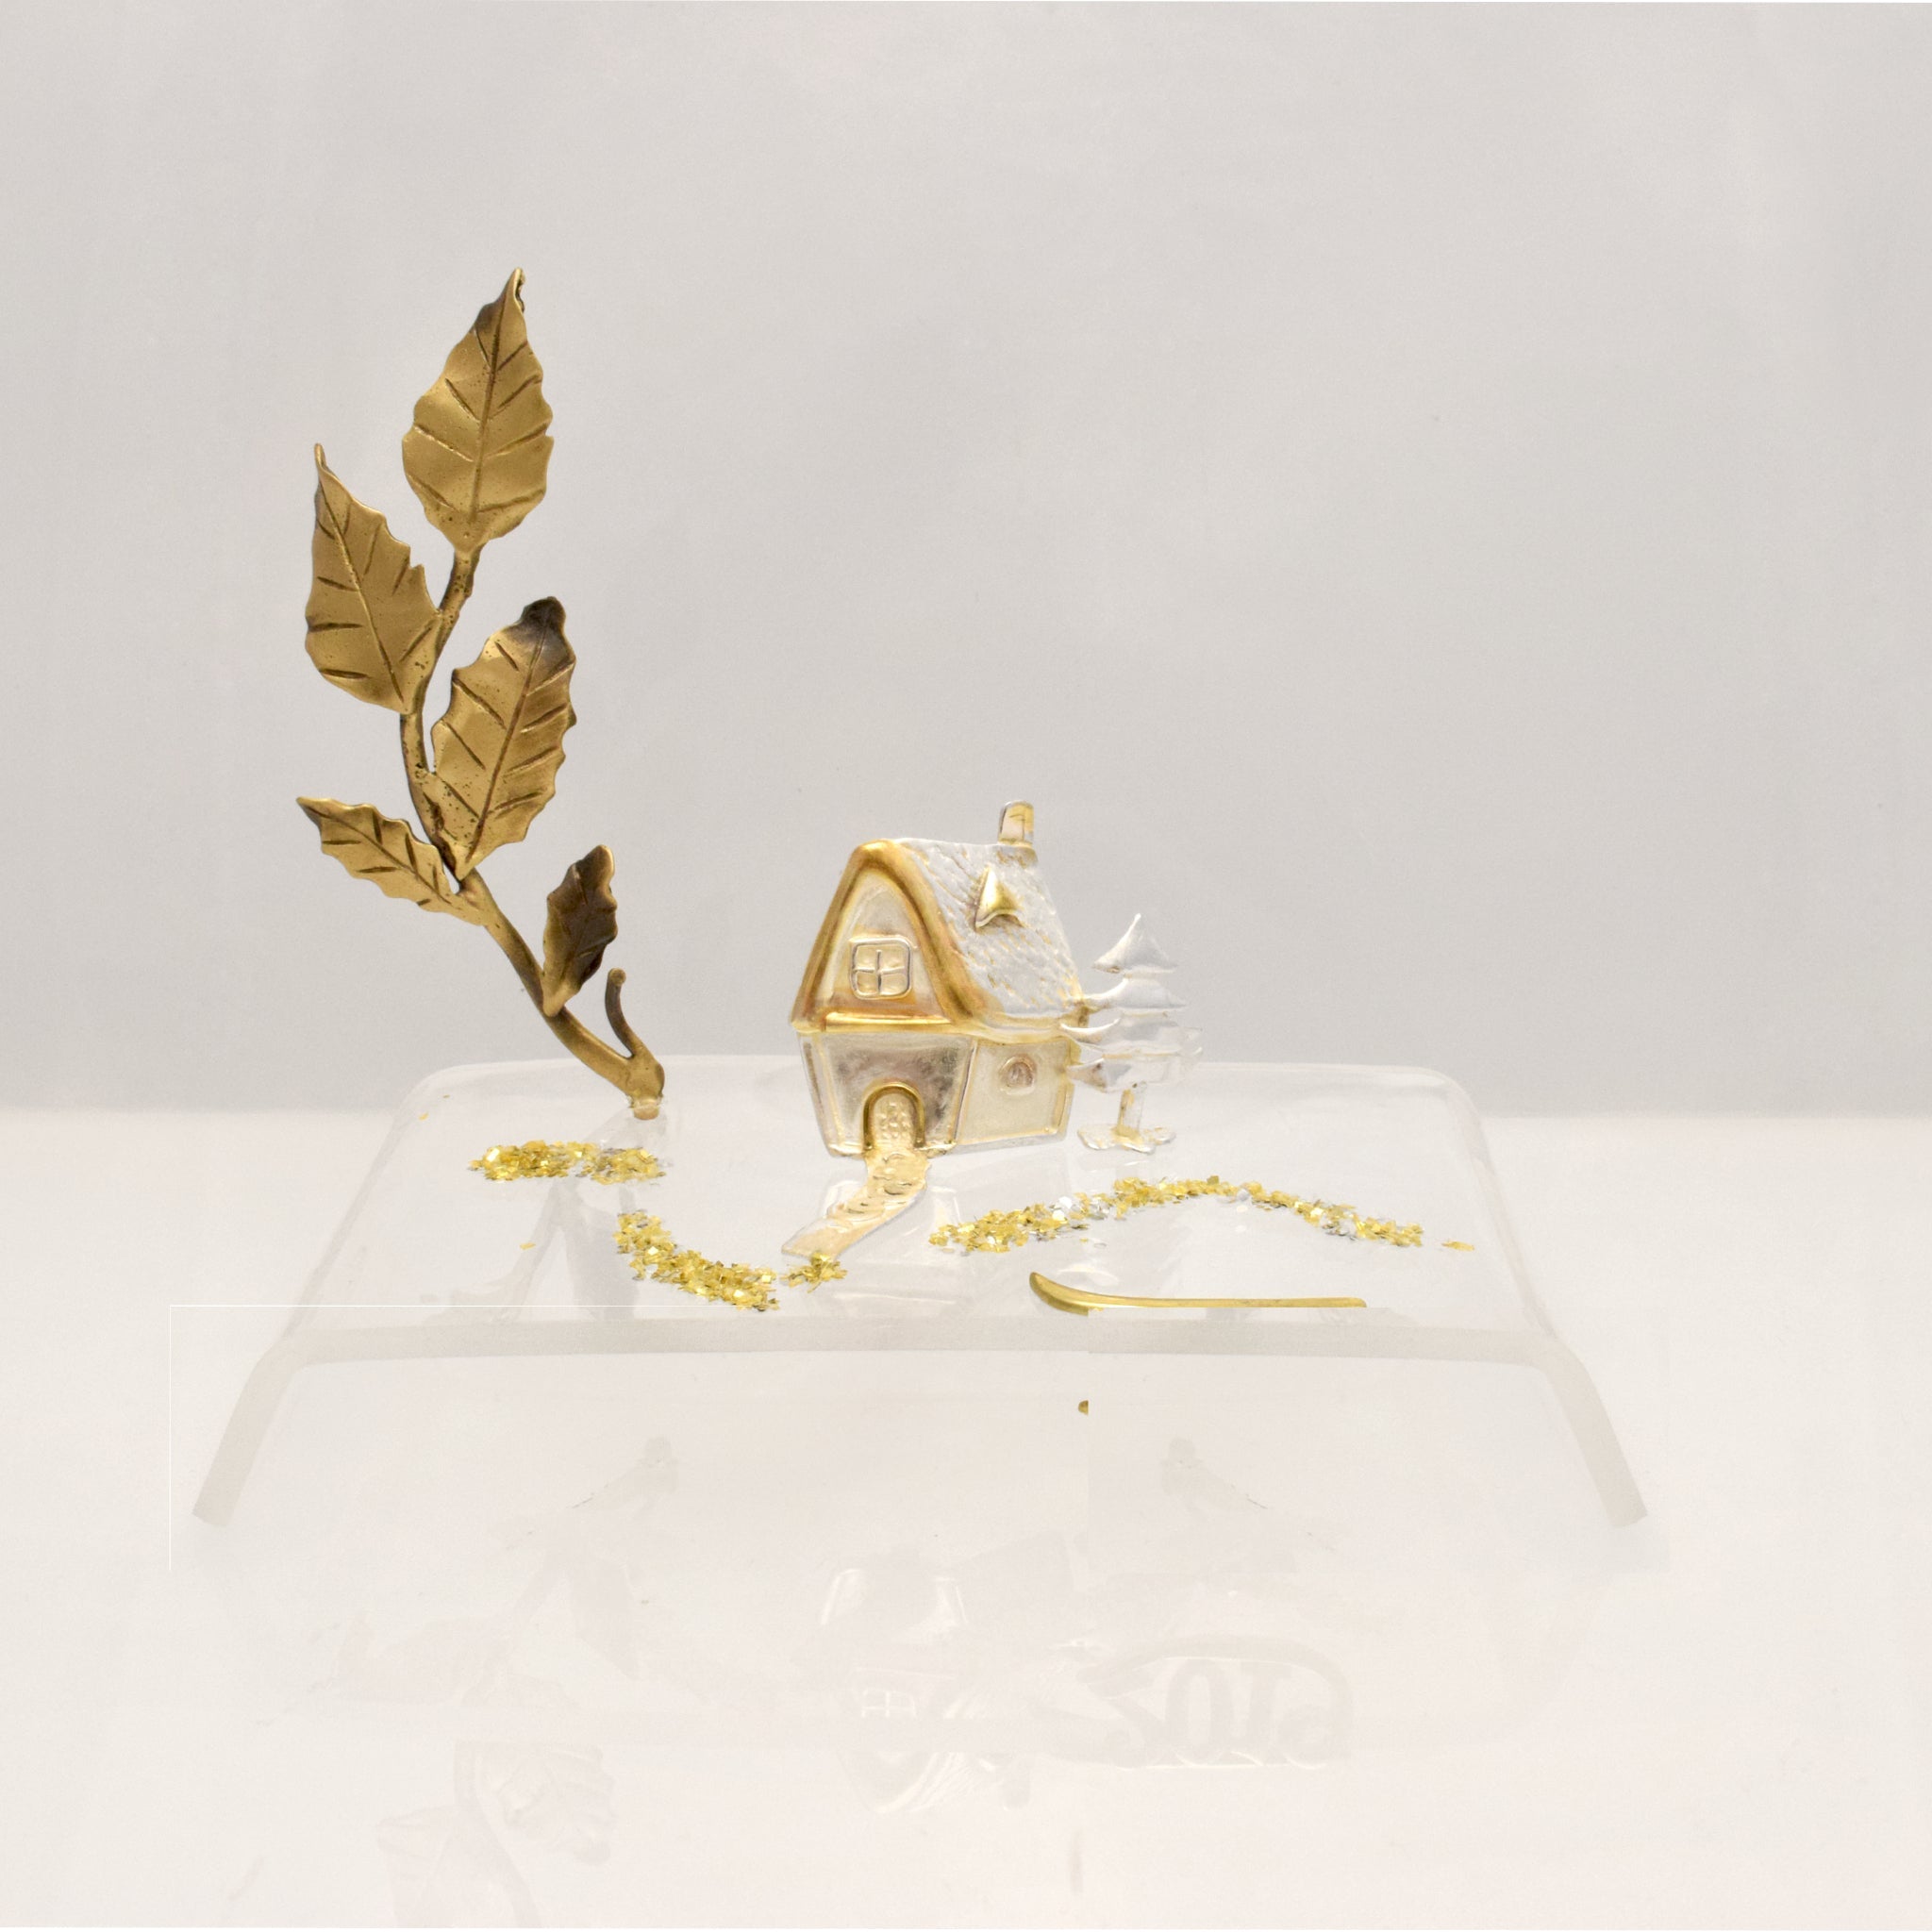 Miniature Home Charm on plexiglass, silver charm with bronze leaves, home decor, gift idea, charm favor (PX-02)